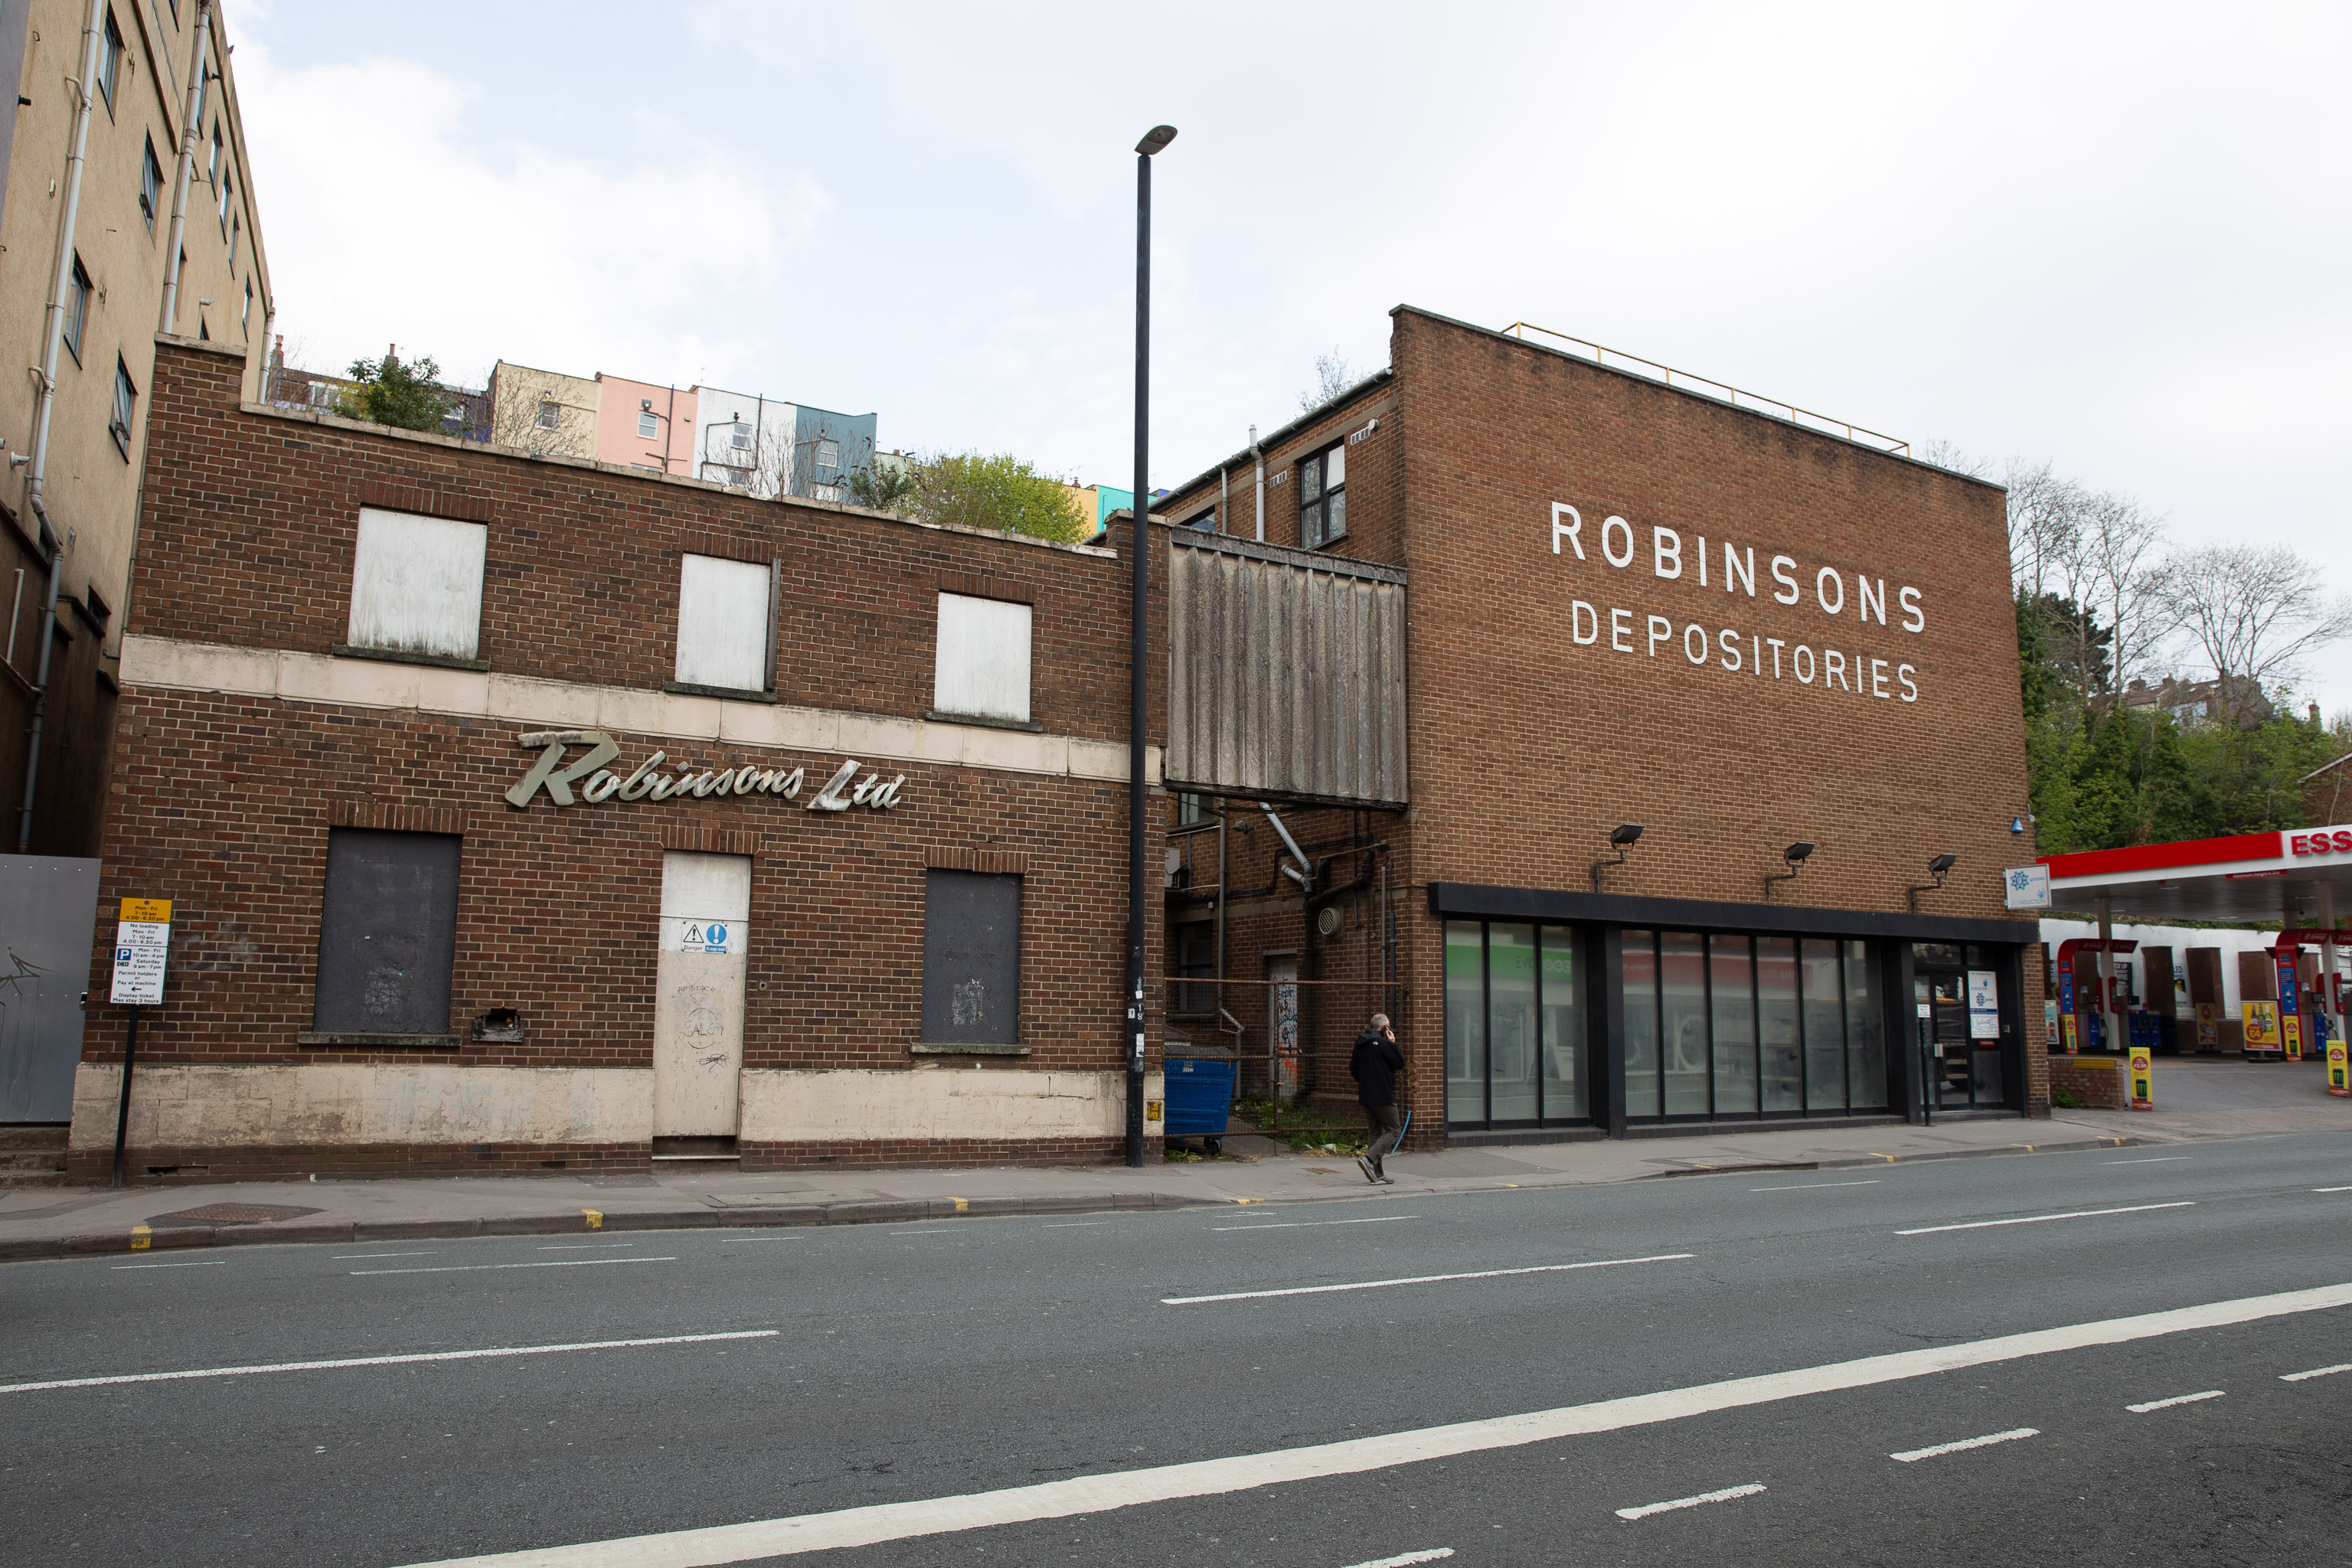 Robinsons Depositories
I know very little about the history of these buildings. There's a removals firm called Robinsons with some links to Bristol, and a building in Bri...